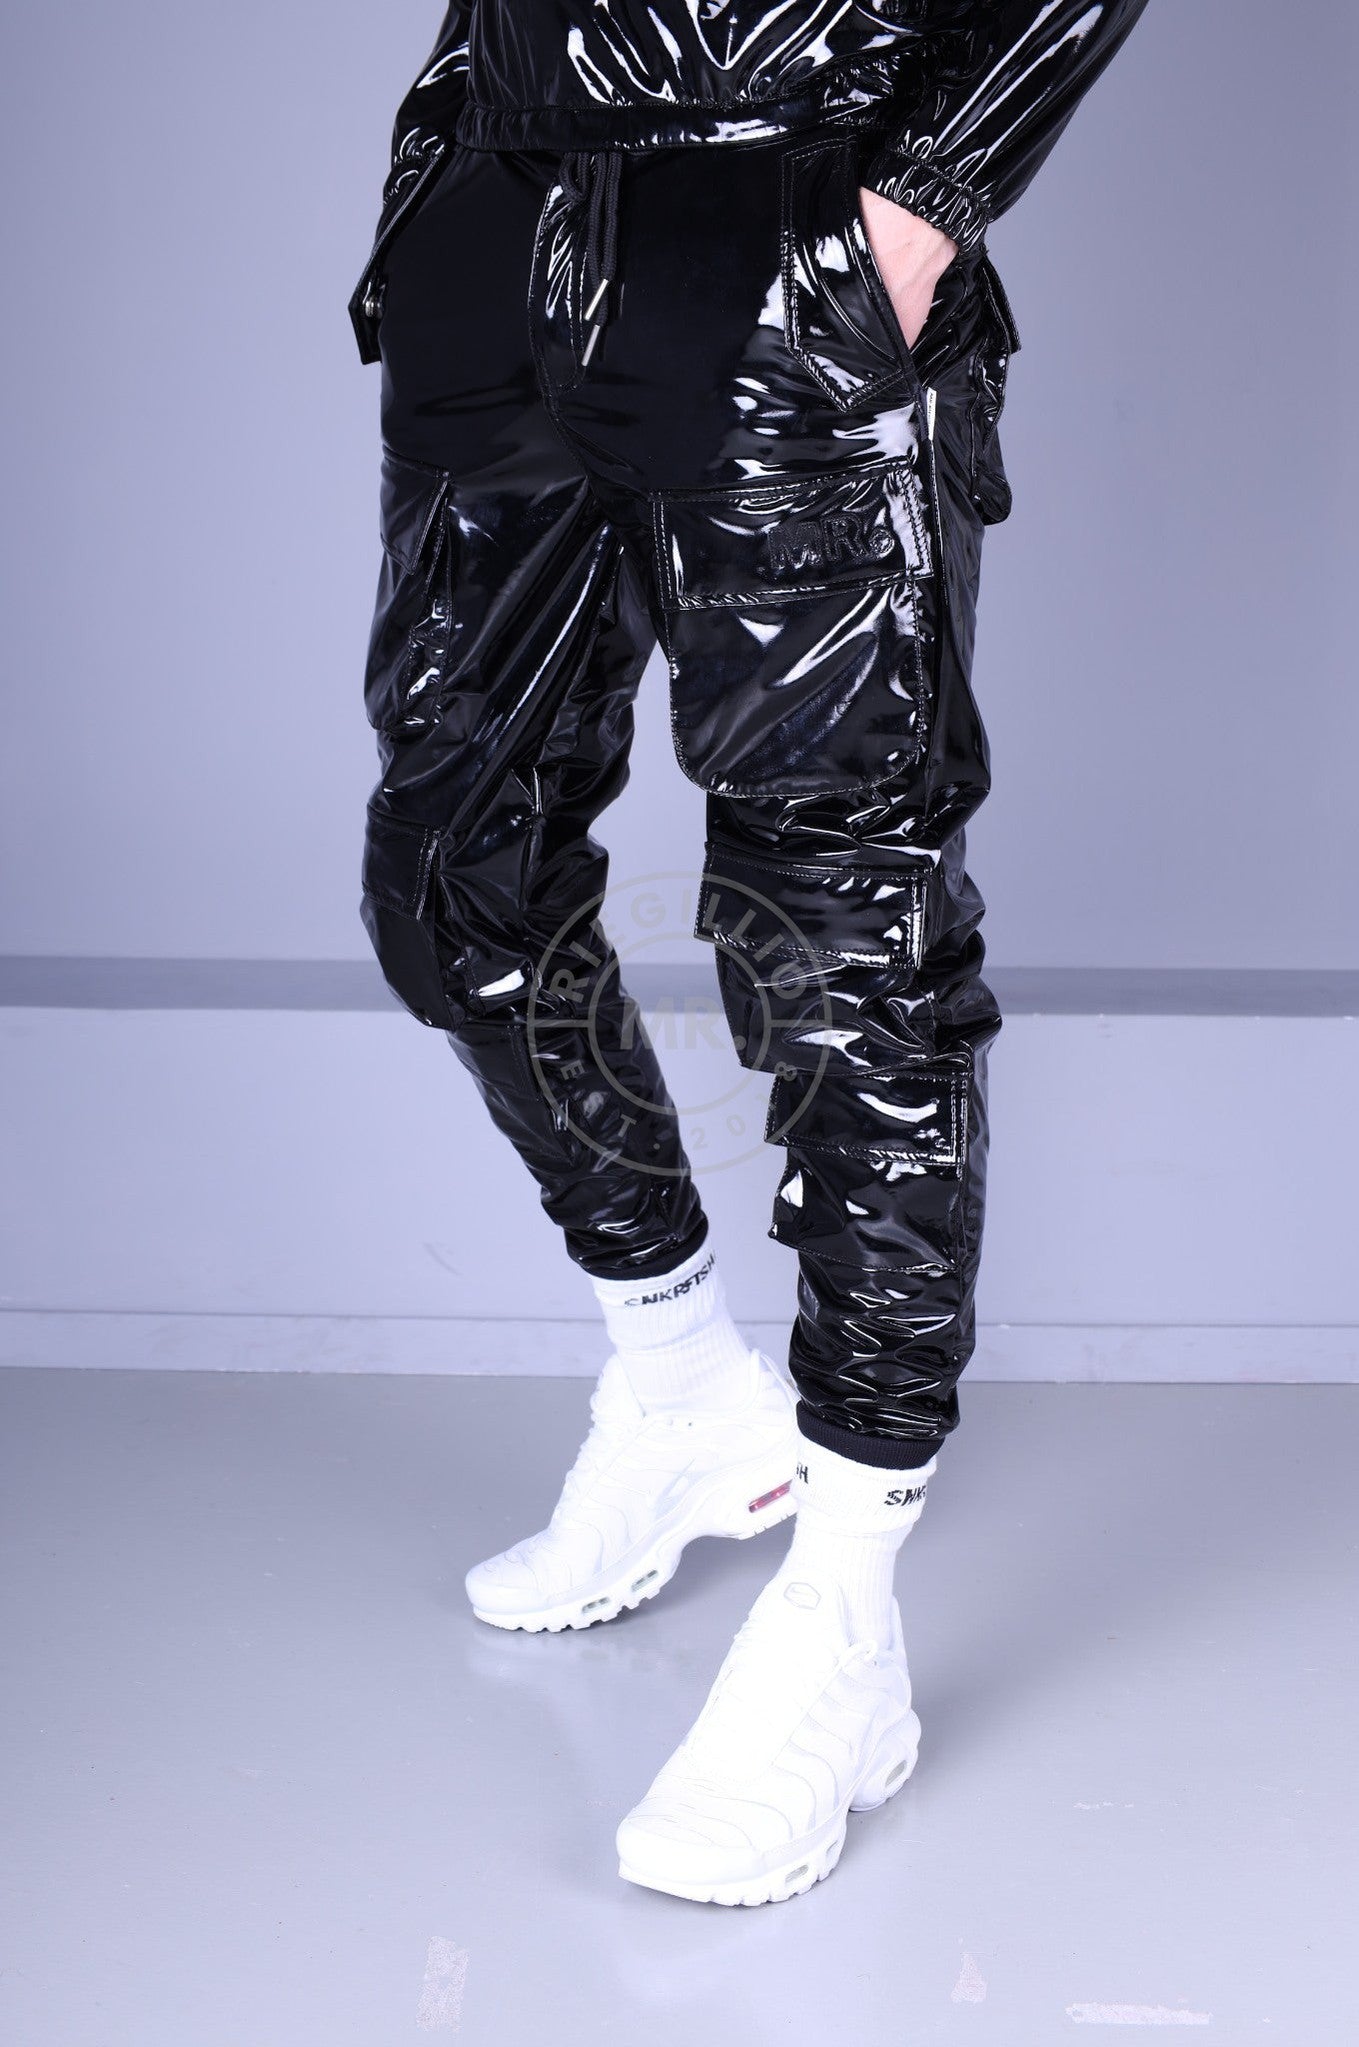 PVC Track Pants S-4XL, Black-White (NOW WITH POCKETS)